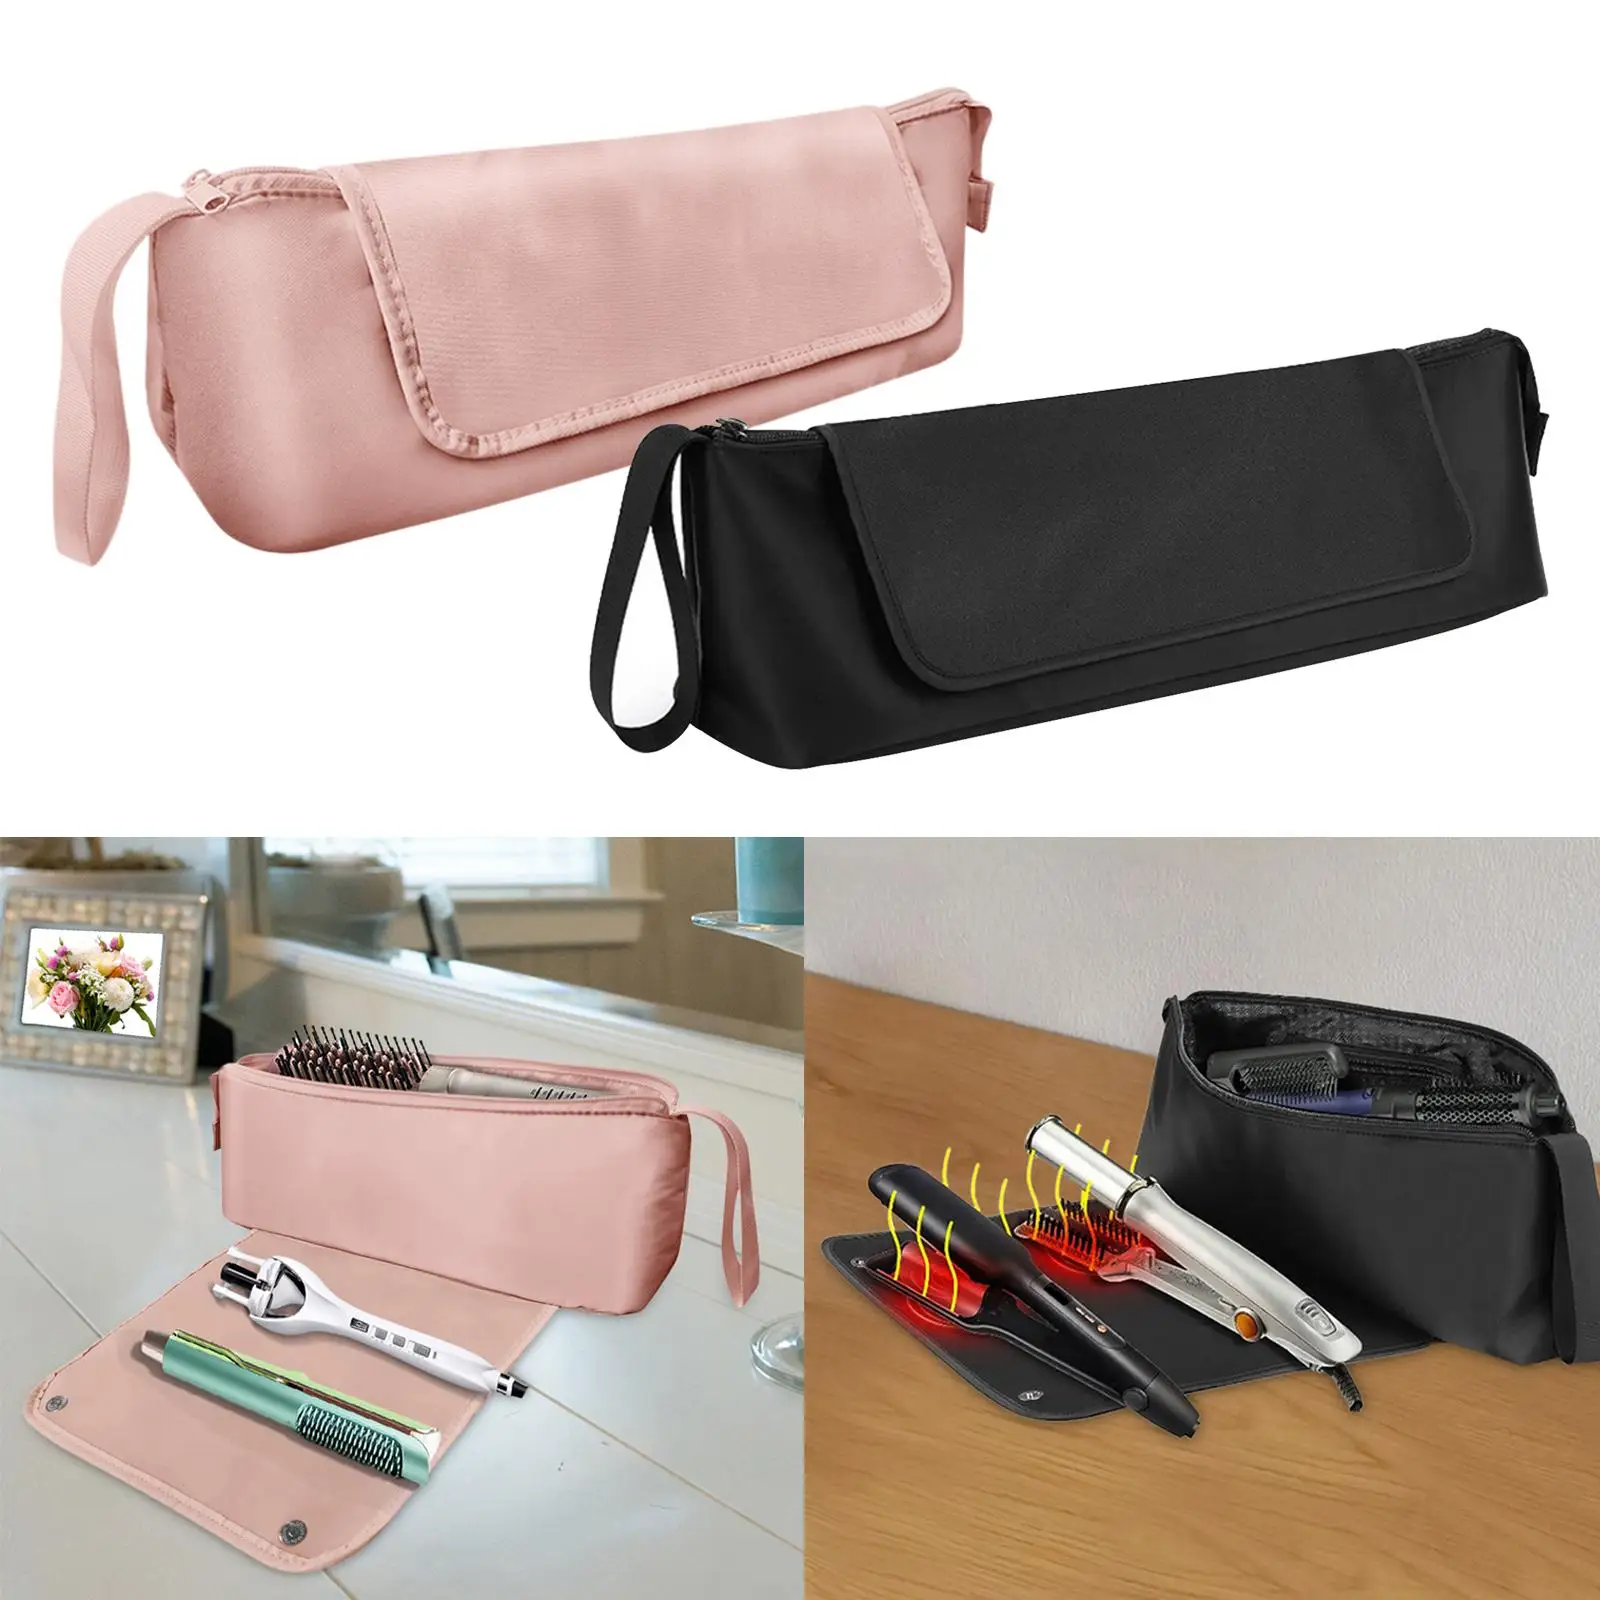 Hair Styling Accessory Organizer Hair Tools Travel Bag and Heat Resistant Mat for Styling Irons Flat Iron Haircare Accessories